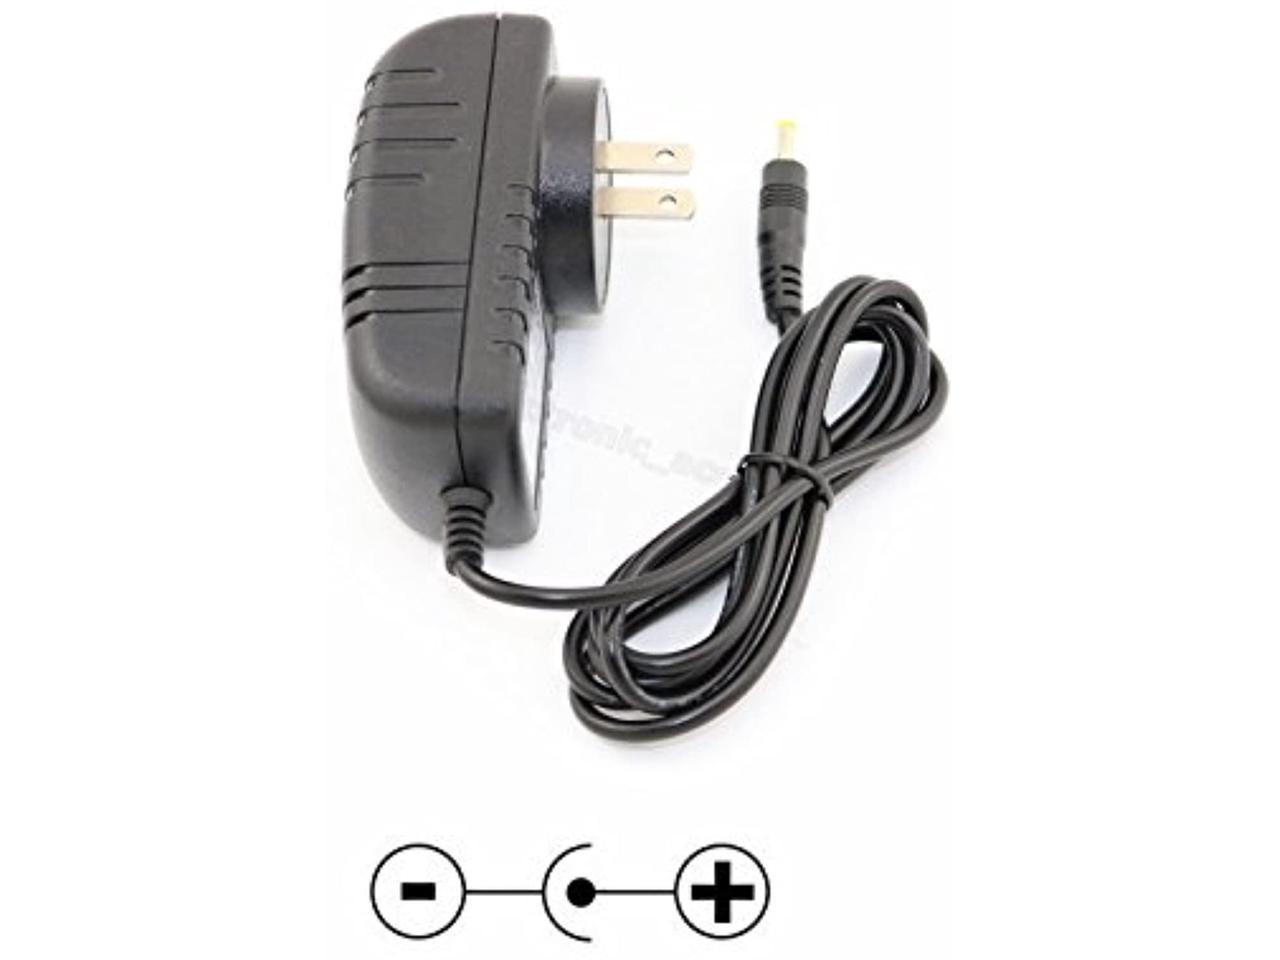 AC to DC 3.5mmx1.35mm 12V 1A Switching Power Supply Adapter SL# 